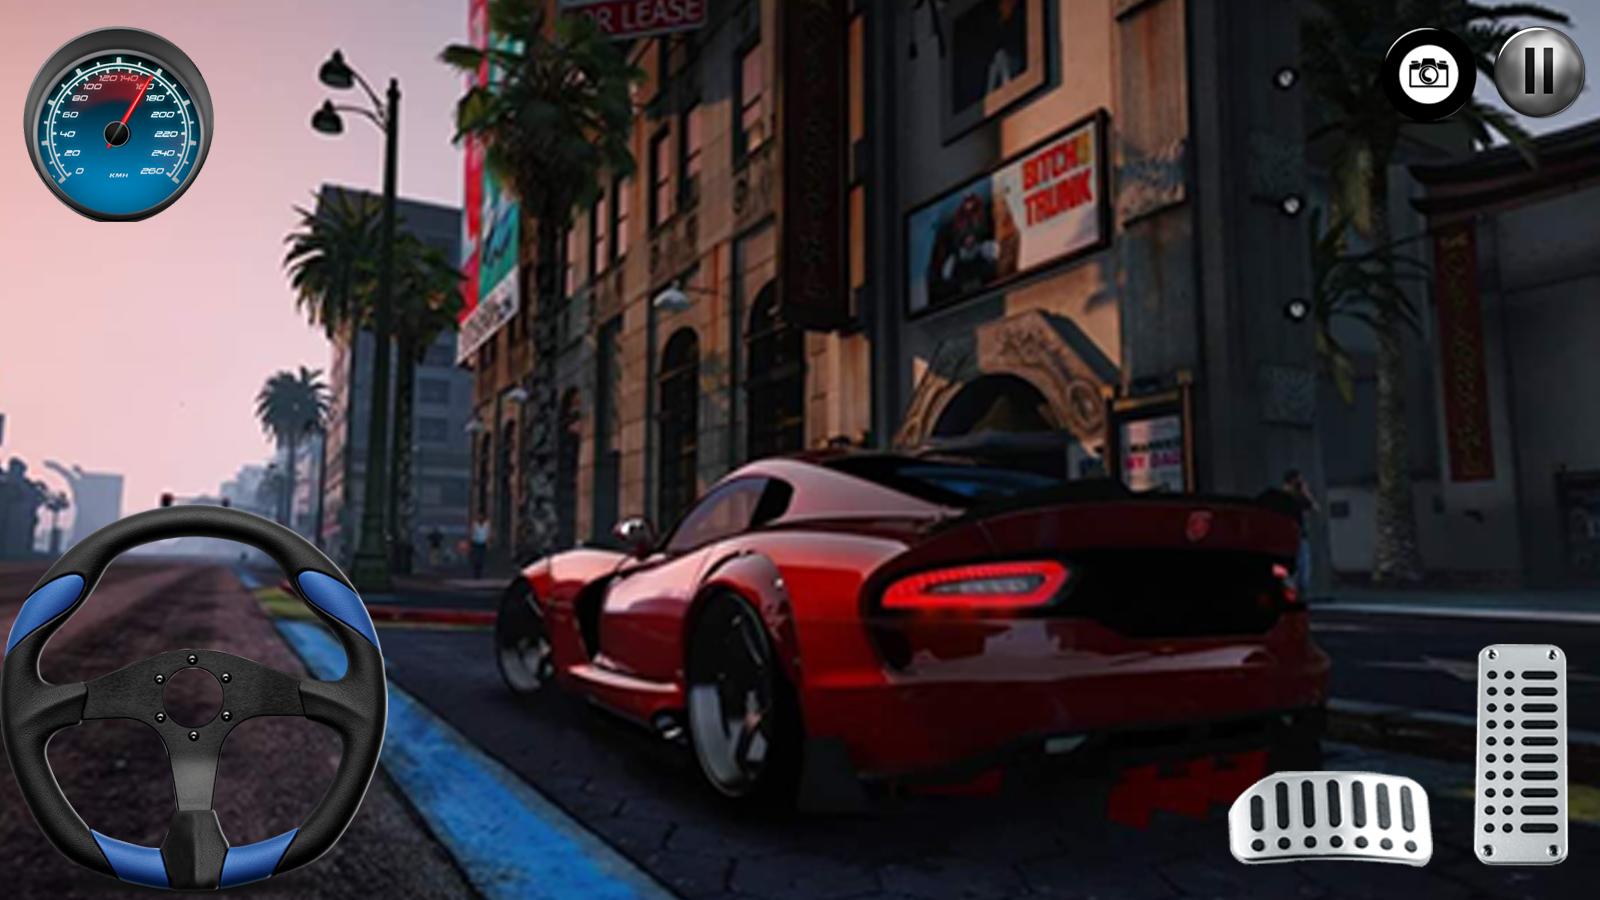 Self Drive Dodge Viper - Carbon Academy for Android - APK Download - 